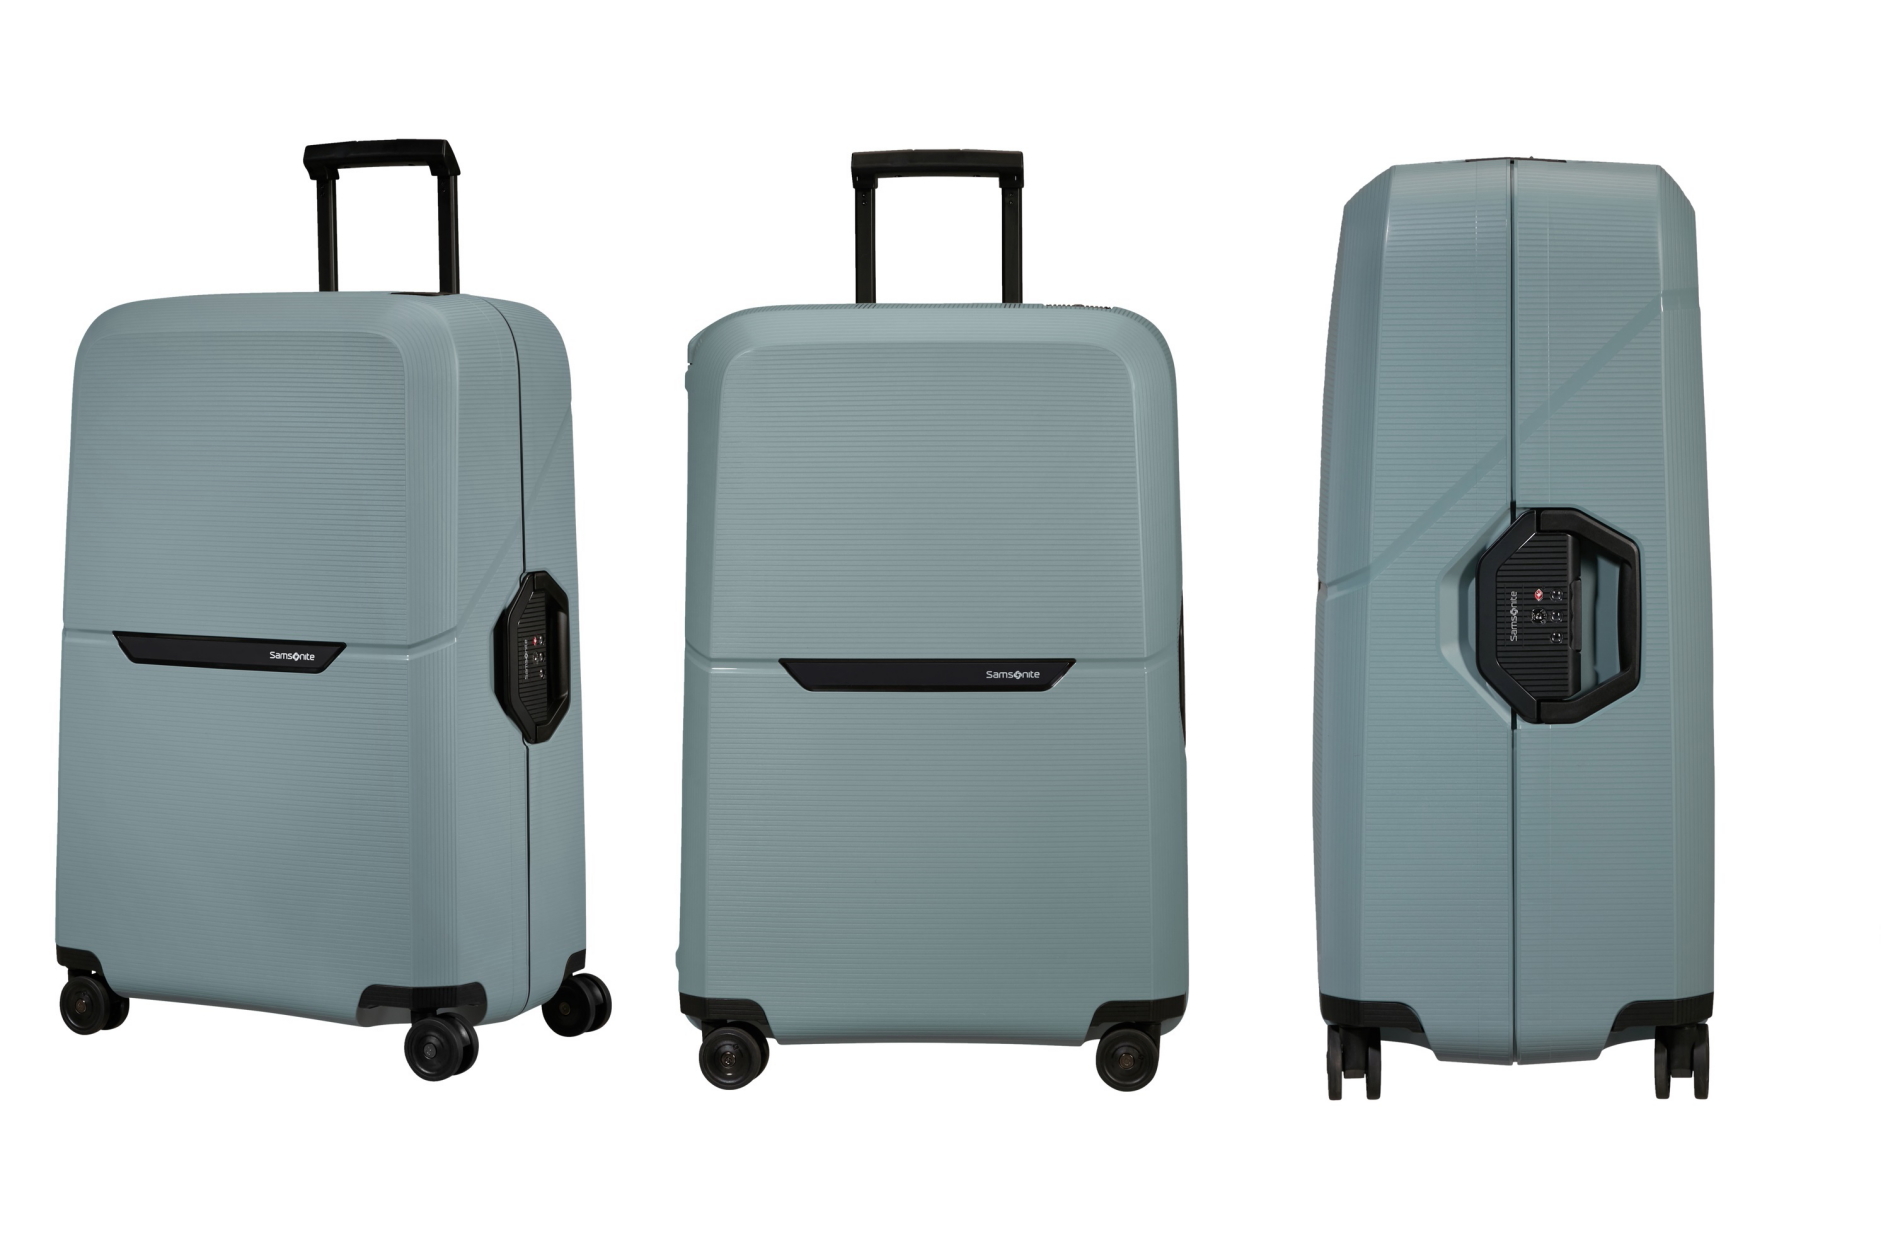 The Samsonite Magnum Eco Spinner (4 wheels) 75cm in 'Ice Blue' retails for £195 in the UK. It is also available in 55cm and 69cm sizes. Click to enlarge.